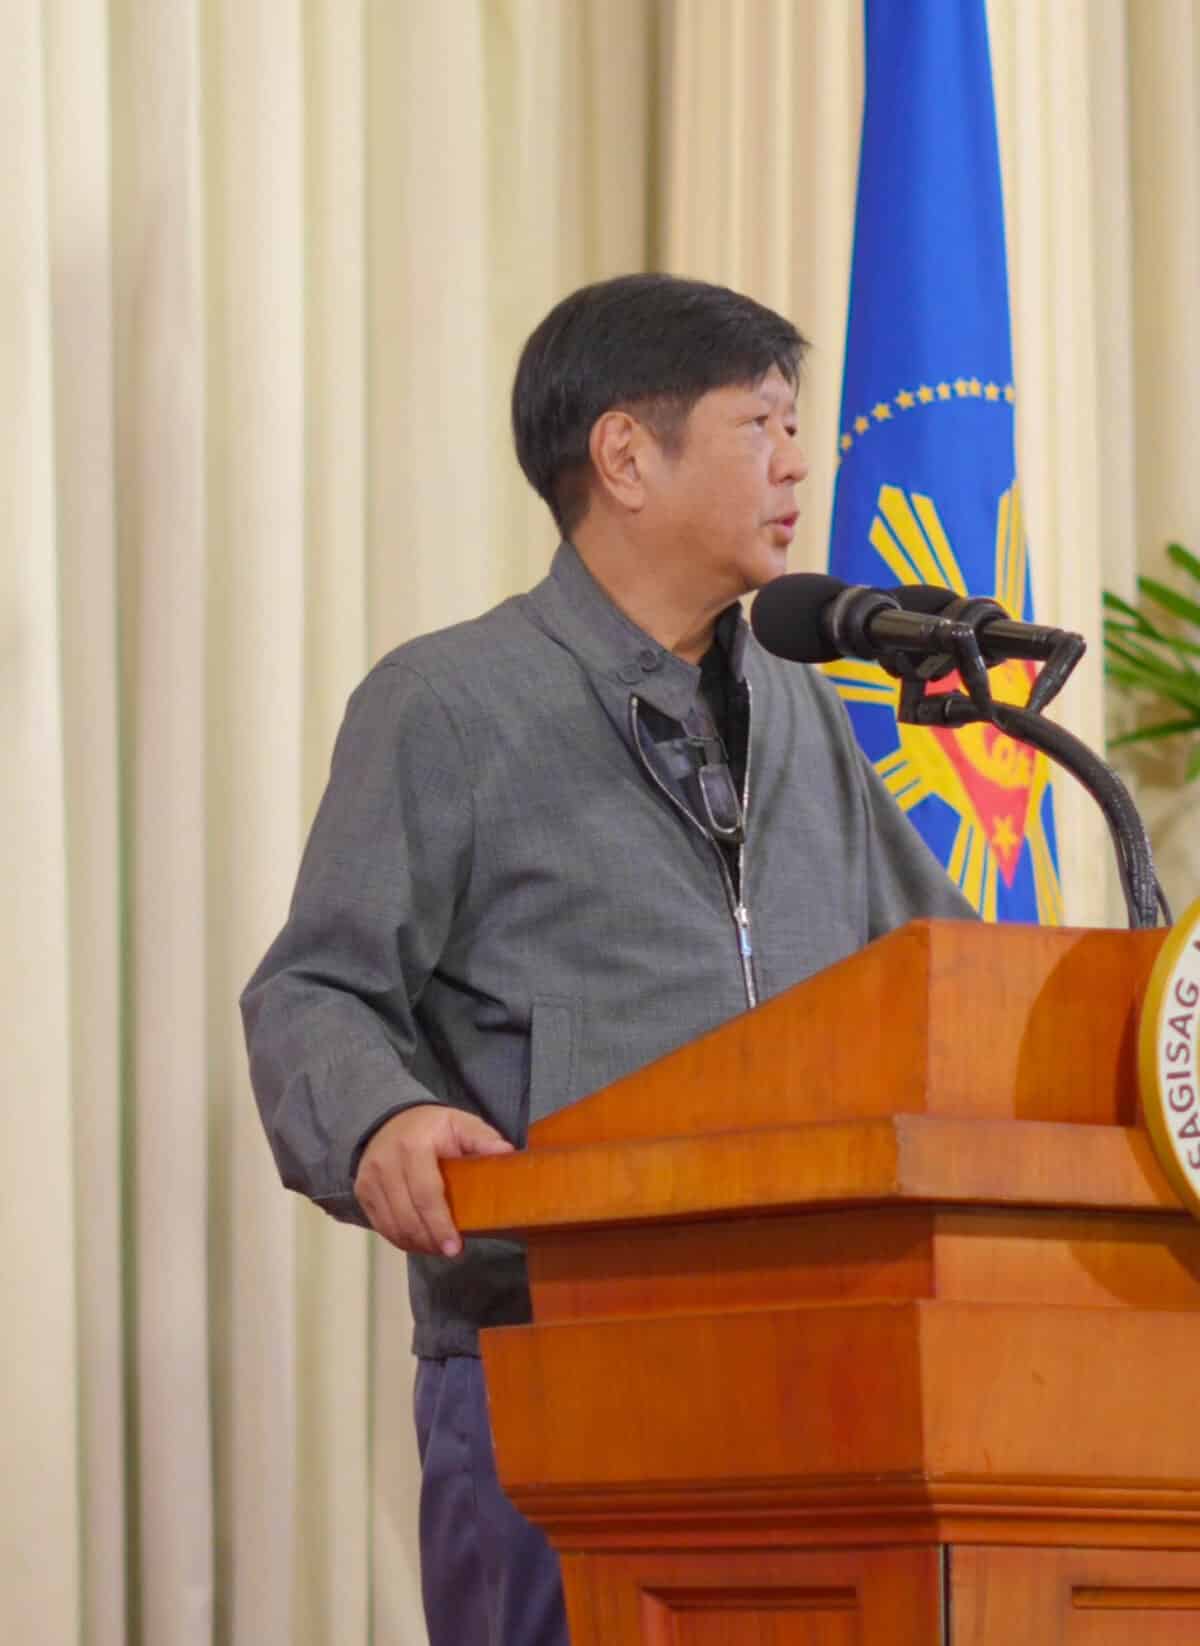 President Ferdinand Marcos Jr. is practicing his speech for his third State of the Nation Address. (Photos courtesy of the Office of the President.)